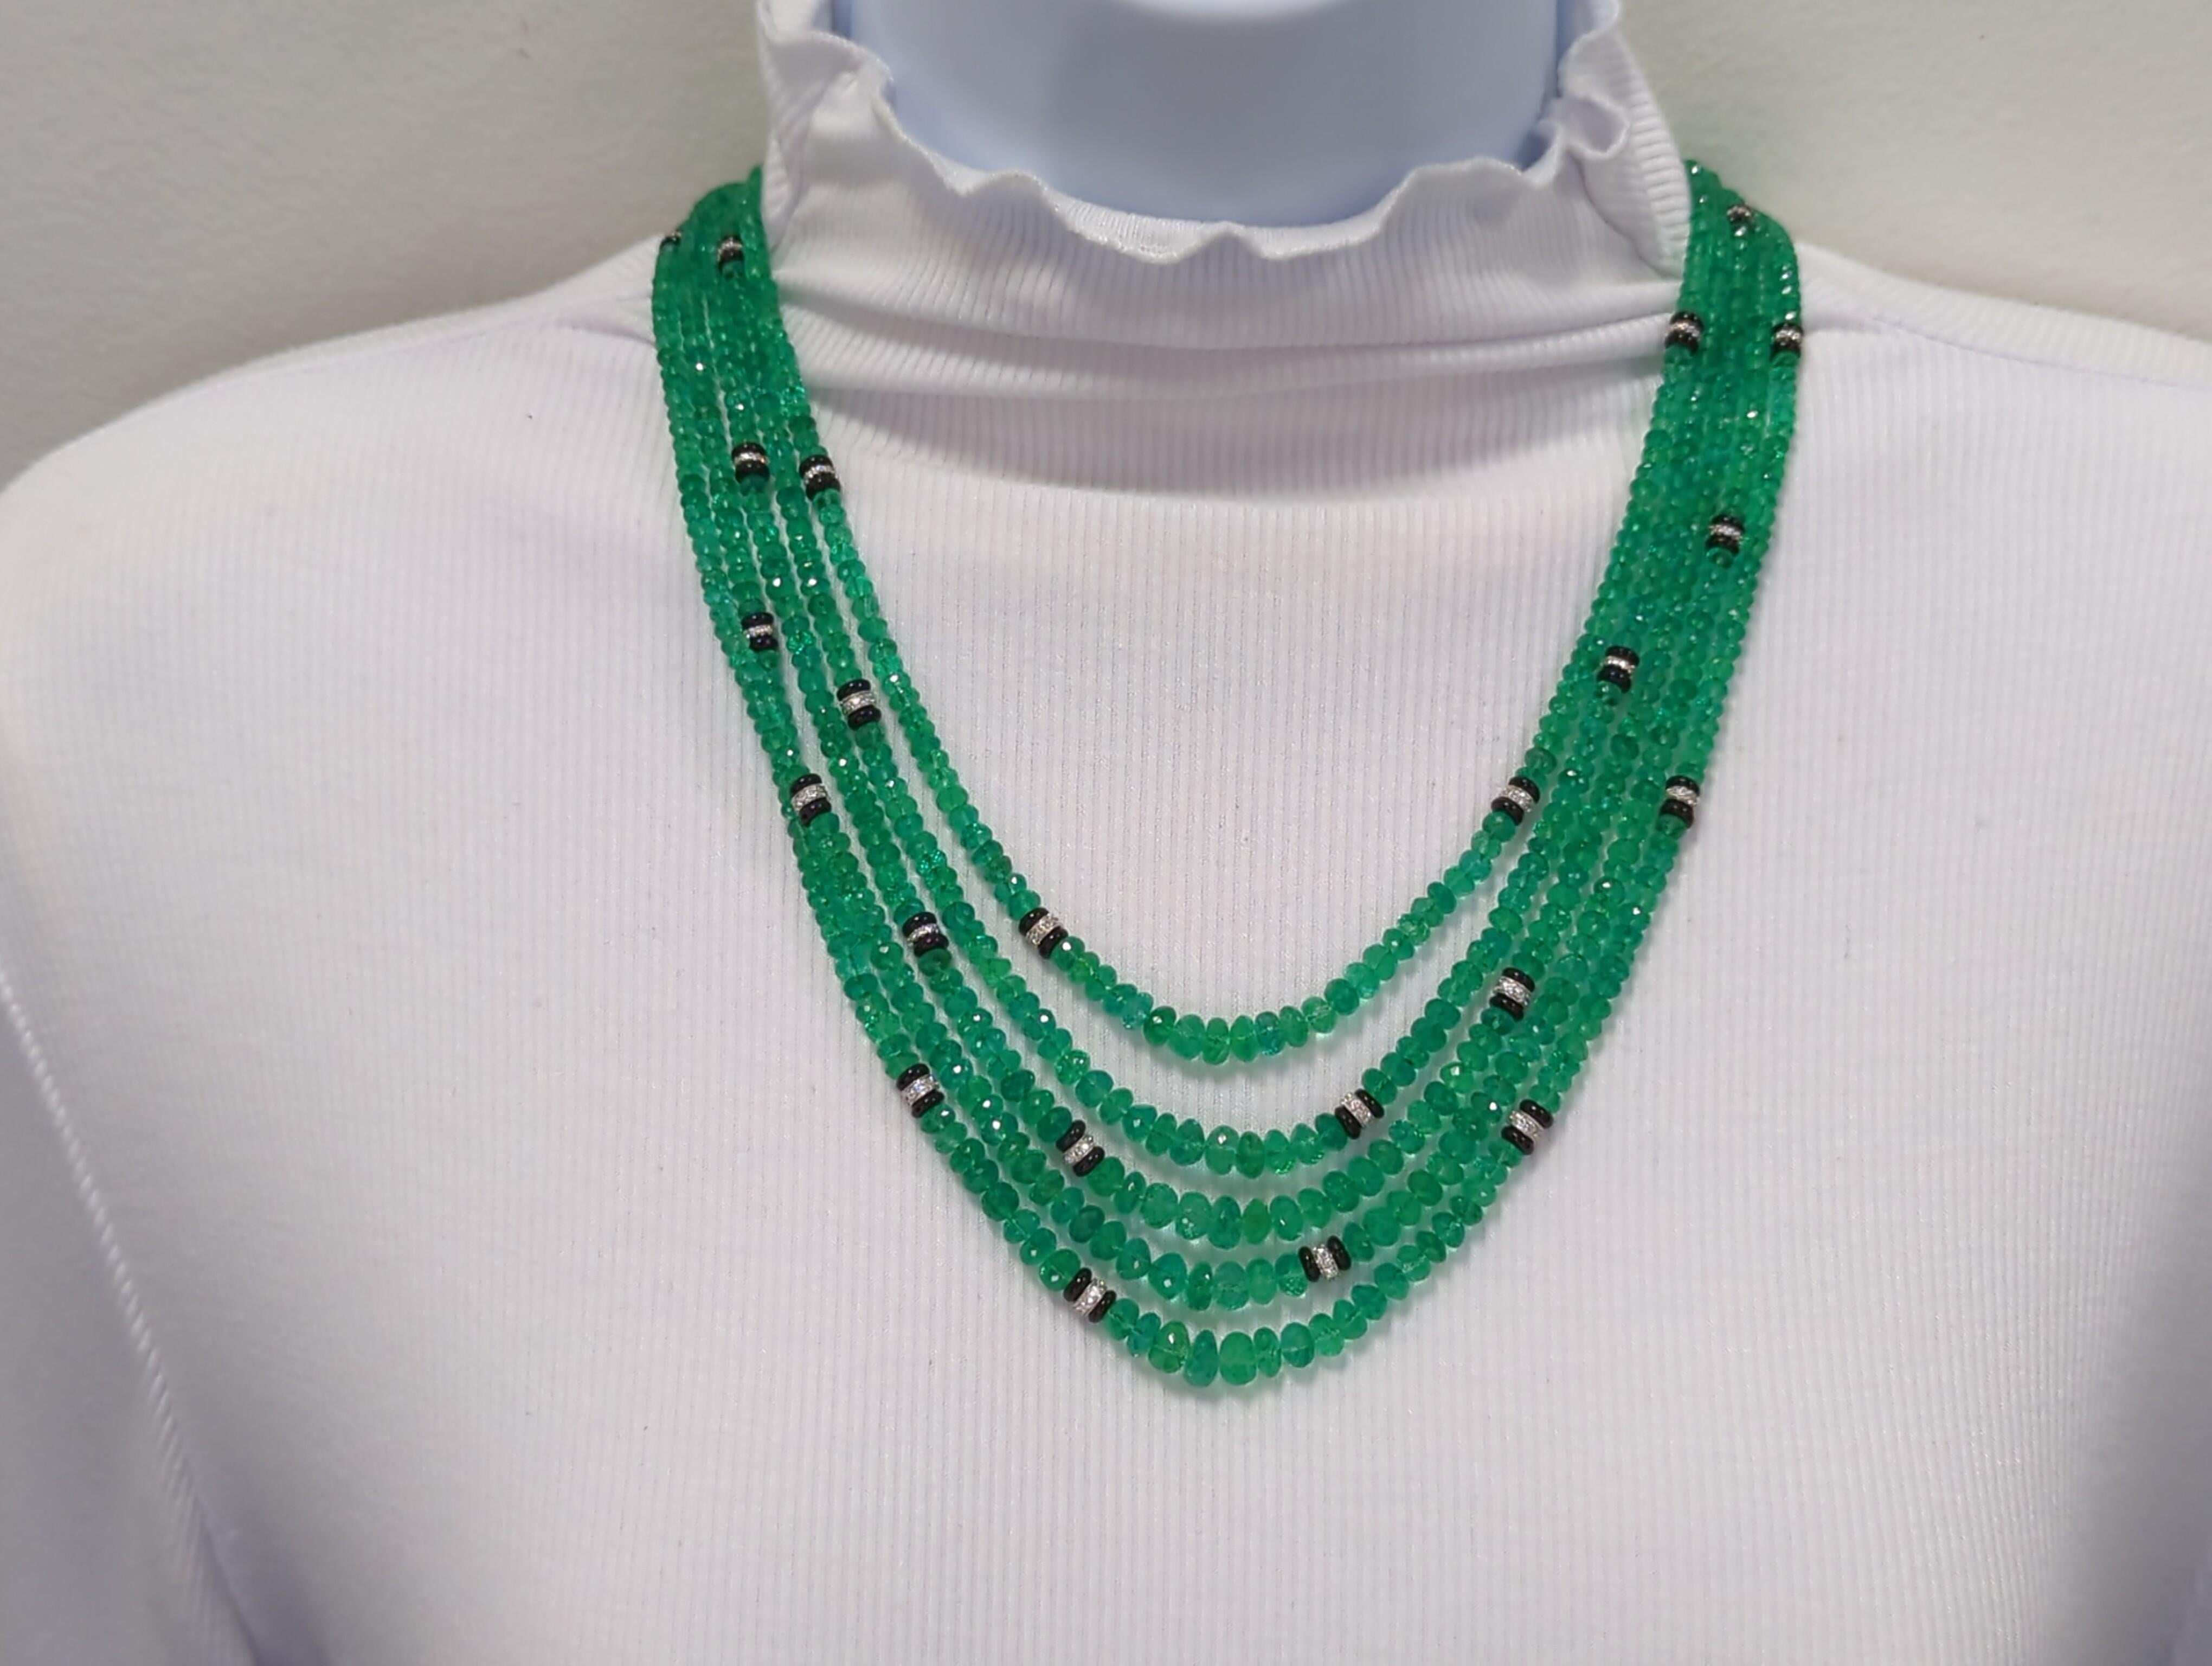 Gorgeous 385.00 ct. Colombian emerald beads with good quality, white, and bright diamond rounds.  Handmade in 18k white gold.  Total of 5 strands.  Length of shortest strand is 23